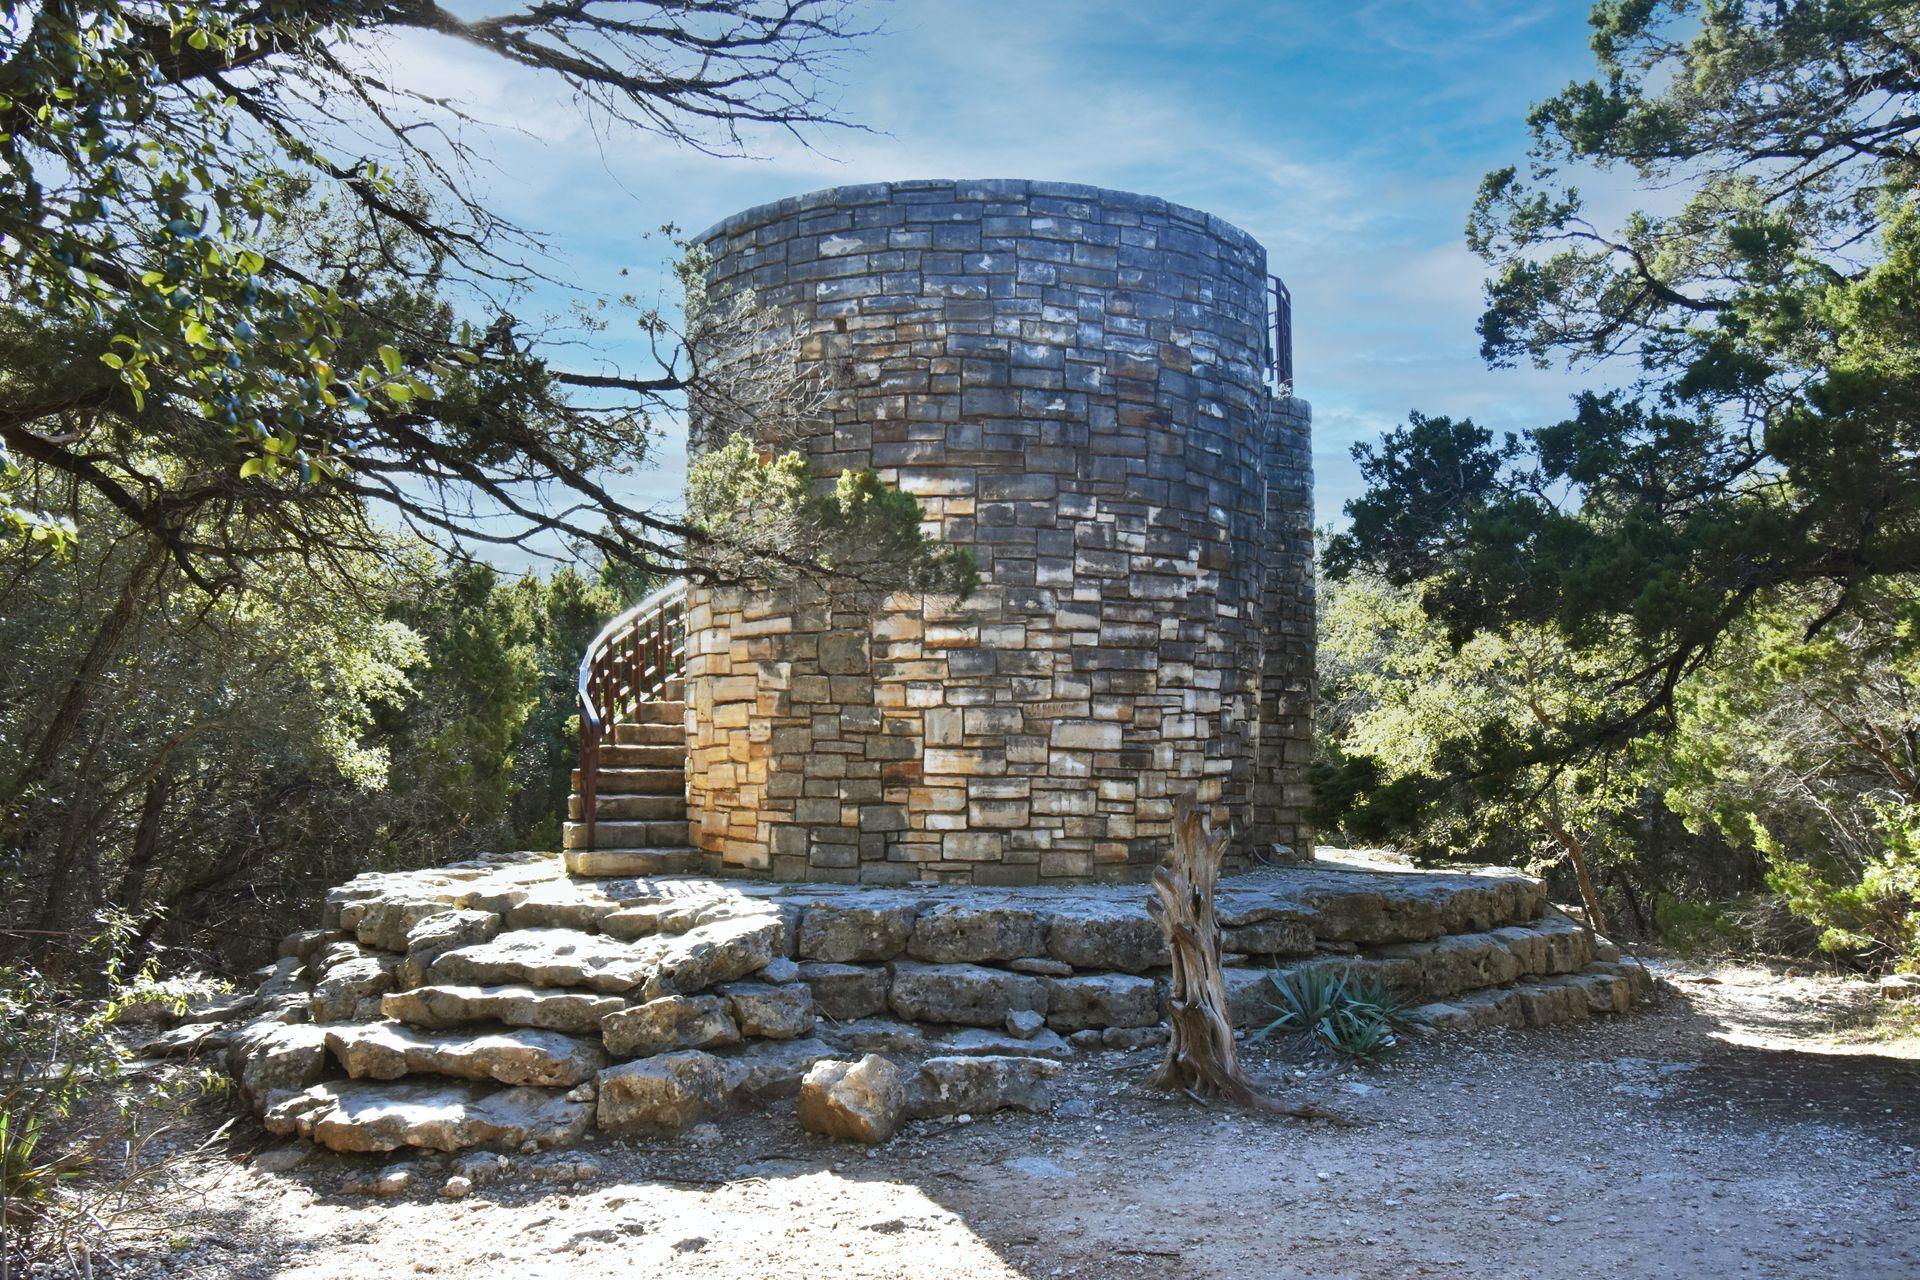 A round tower made of brick with a staircase spiraling around it.